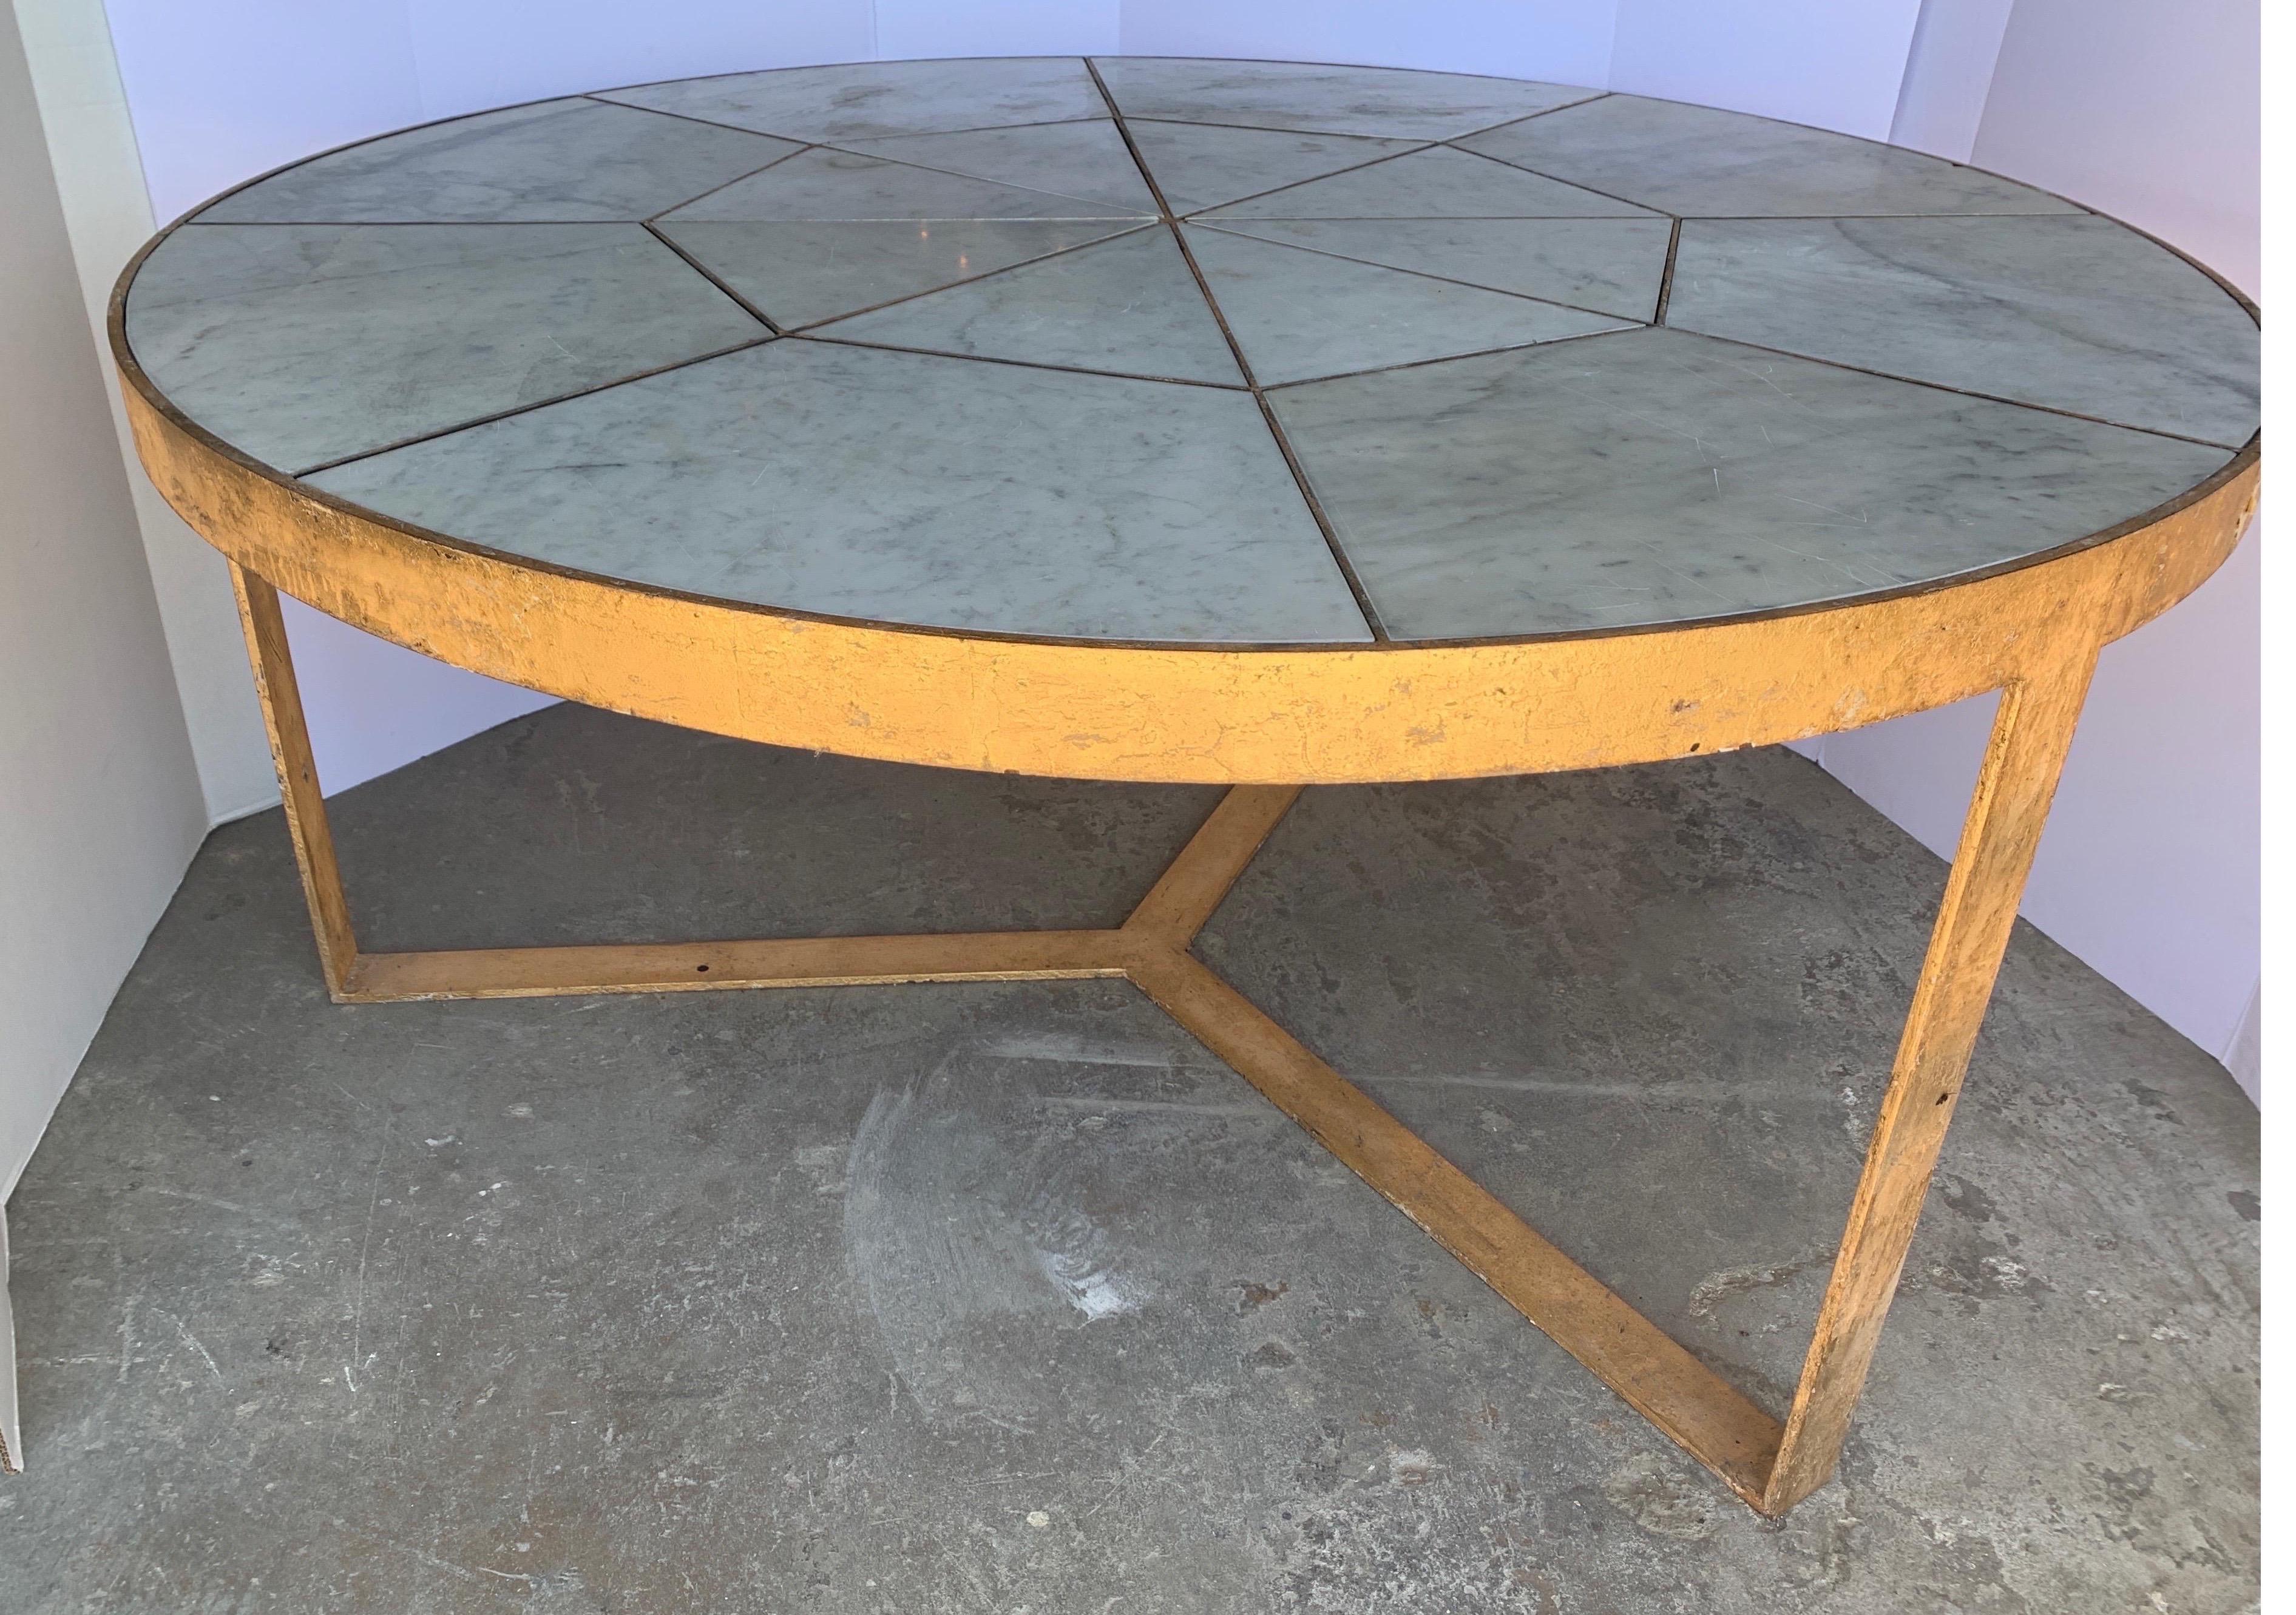 This is one our own fabricated tables that’s perfect for an entry table or dining table to seat 6 to 9 chairs depending on width of chairs. We put nine 18.5 wide chairs around this table. It’s very heavy as well. The inset antique marble has age and